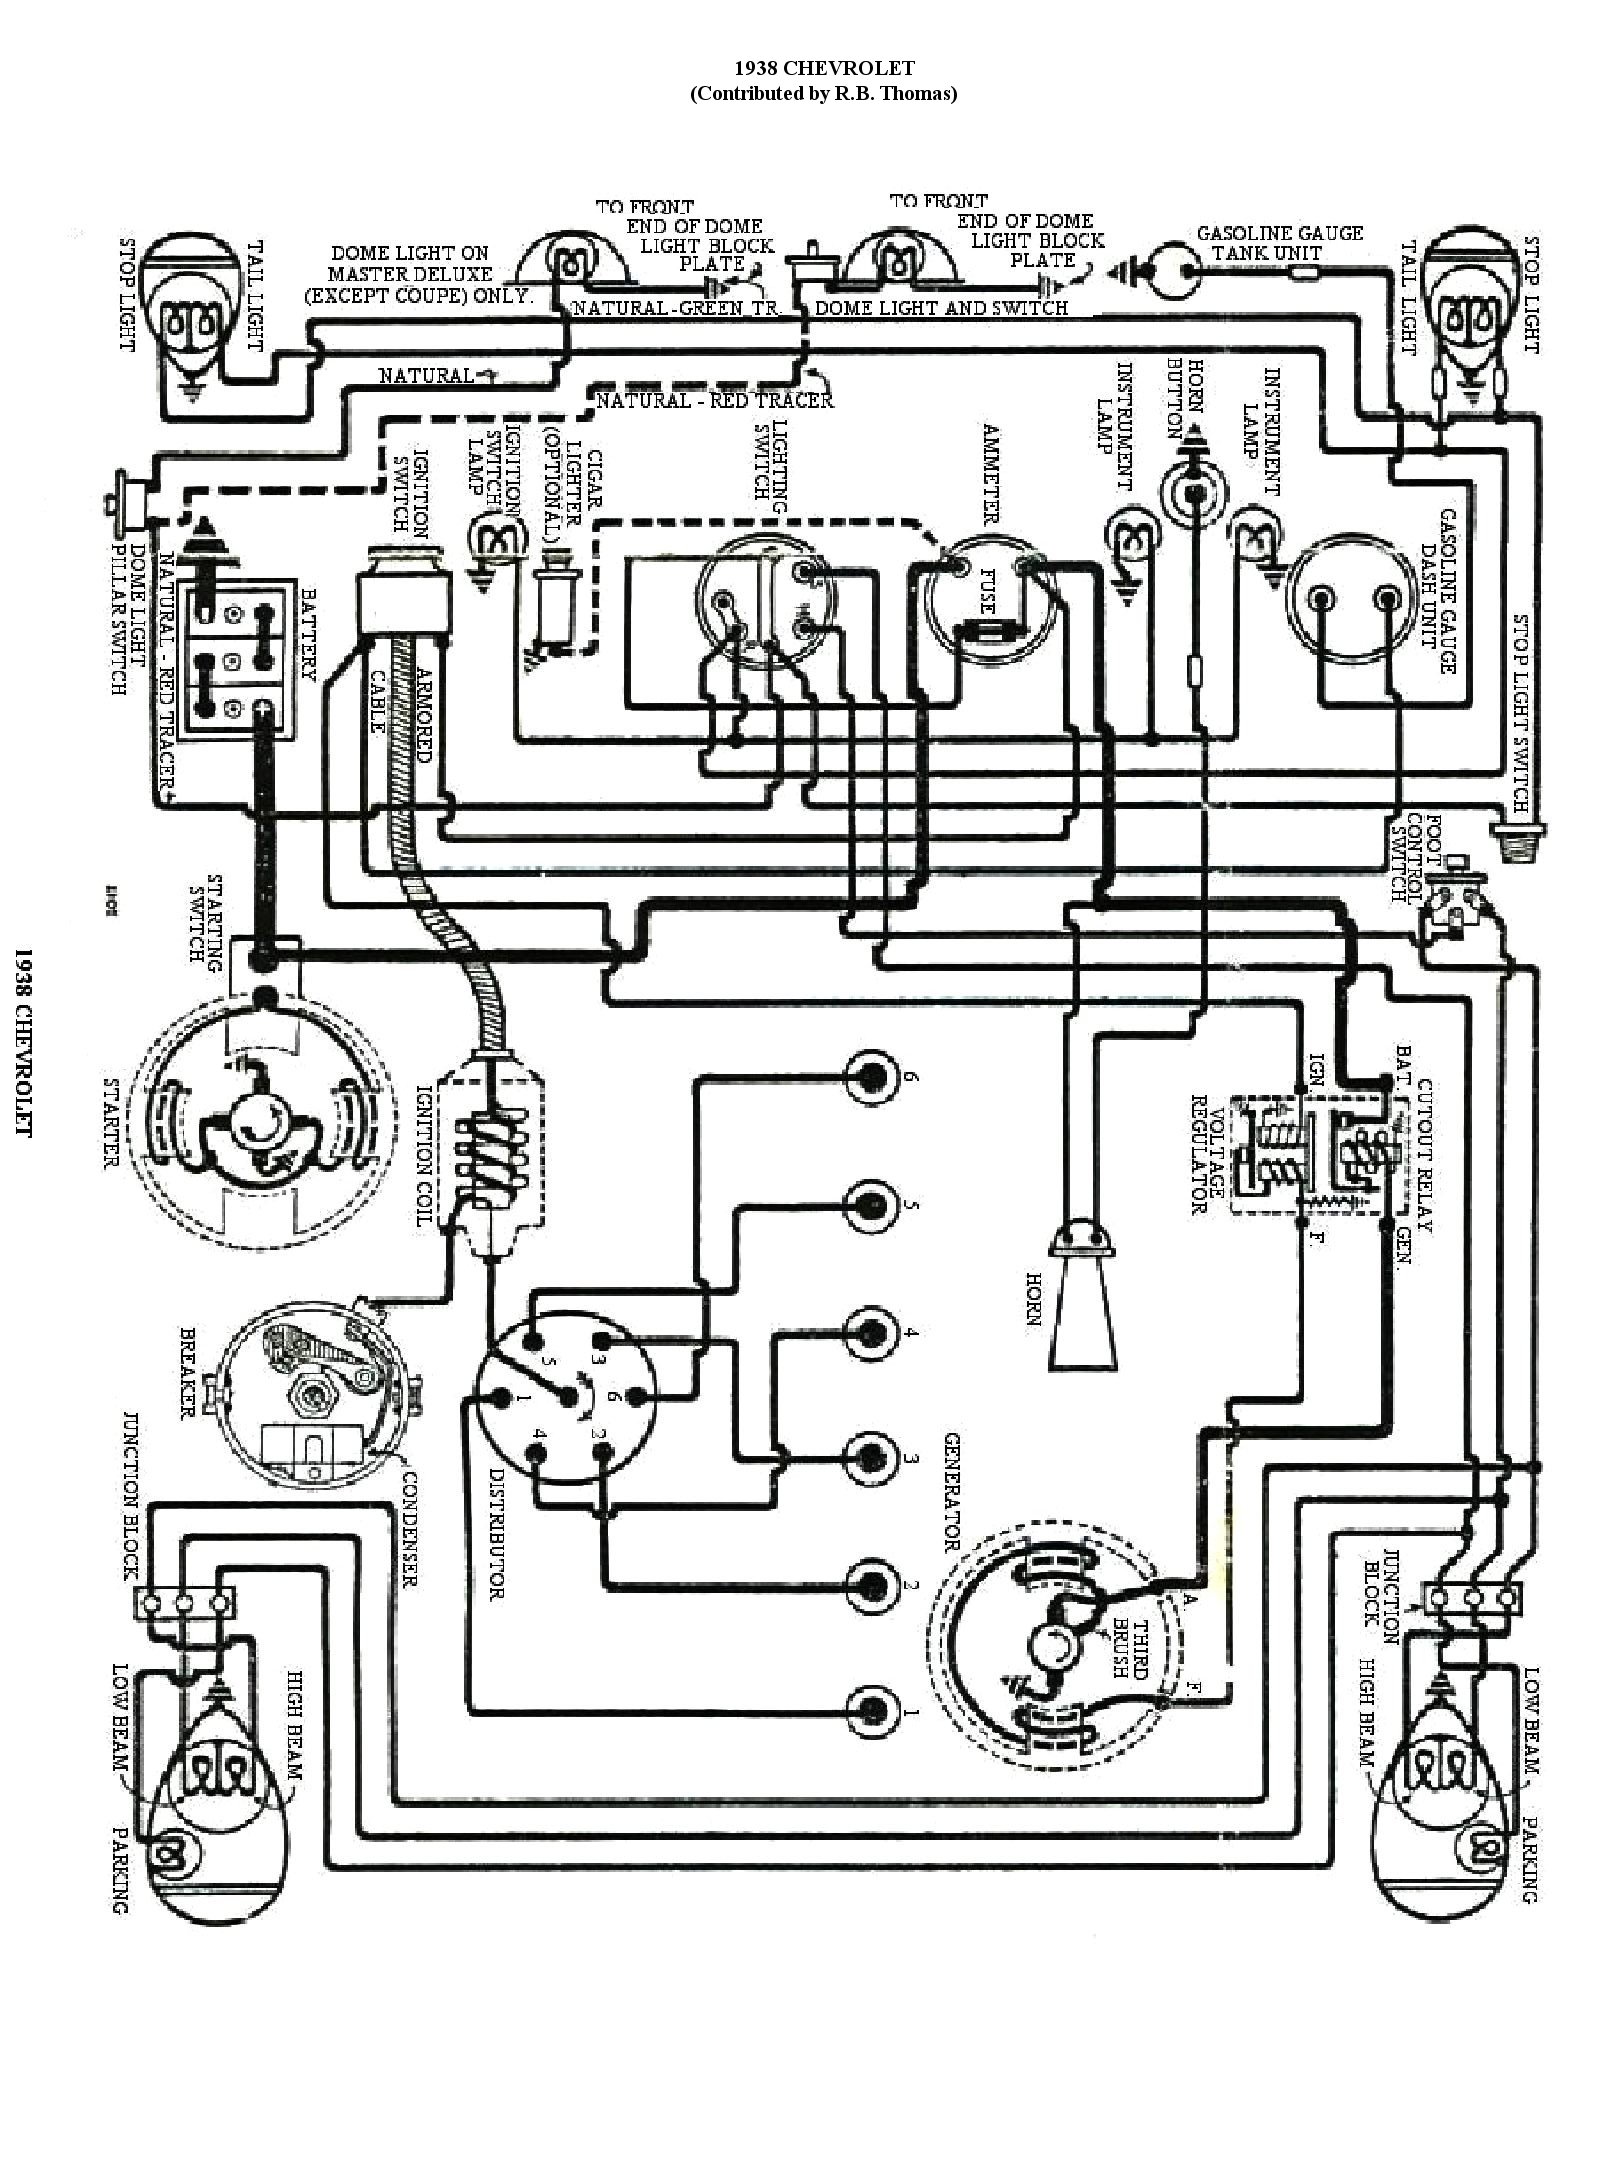 Free Buick Wiring Diagrams from getdrawings.com